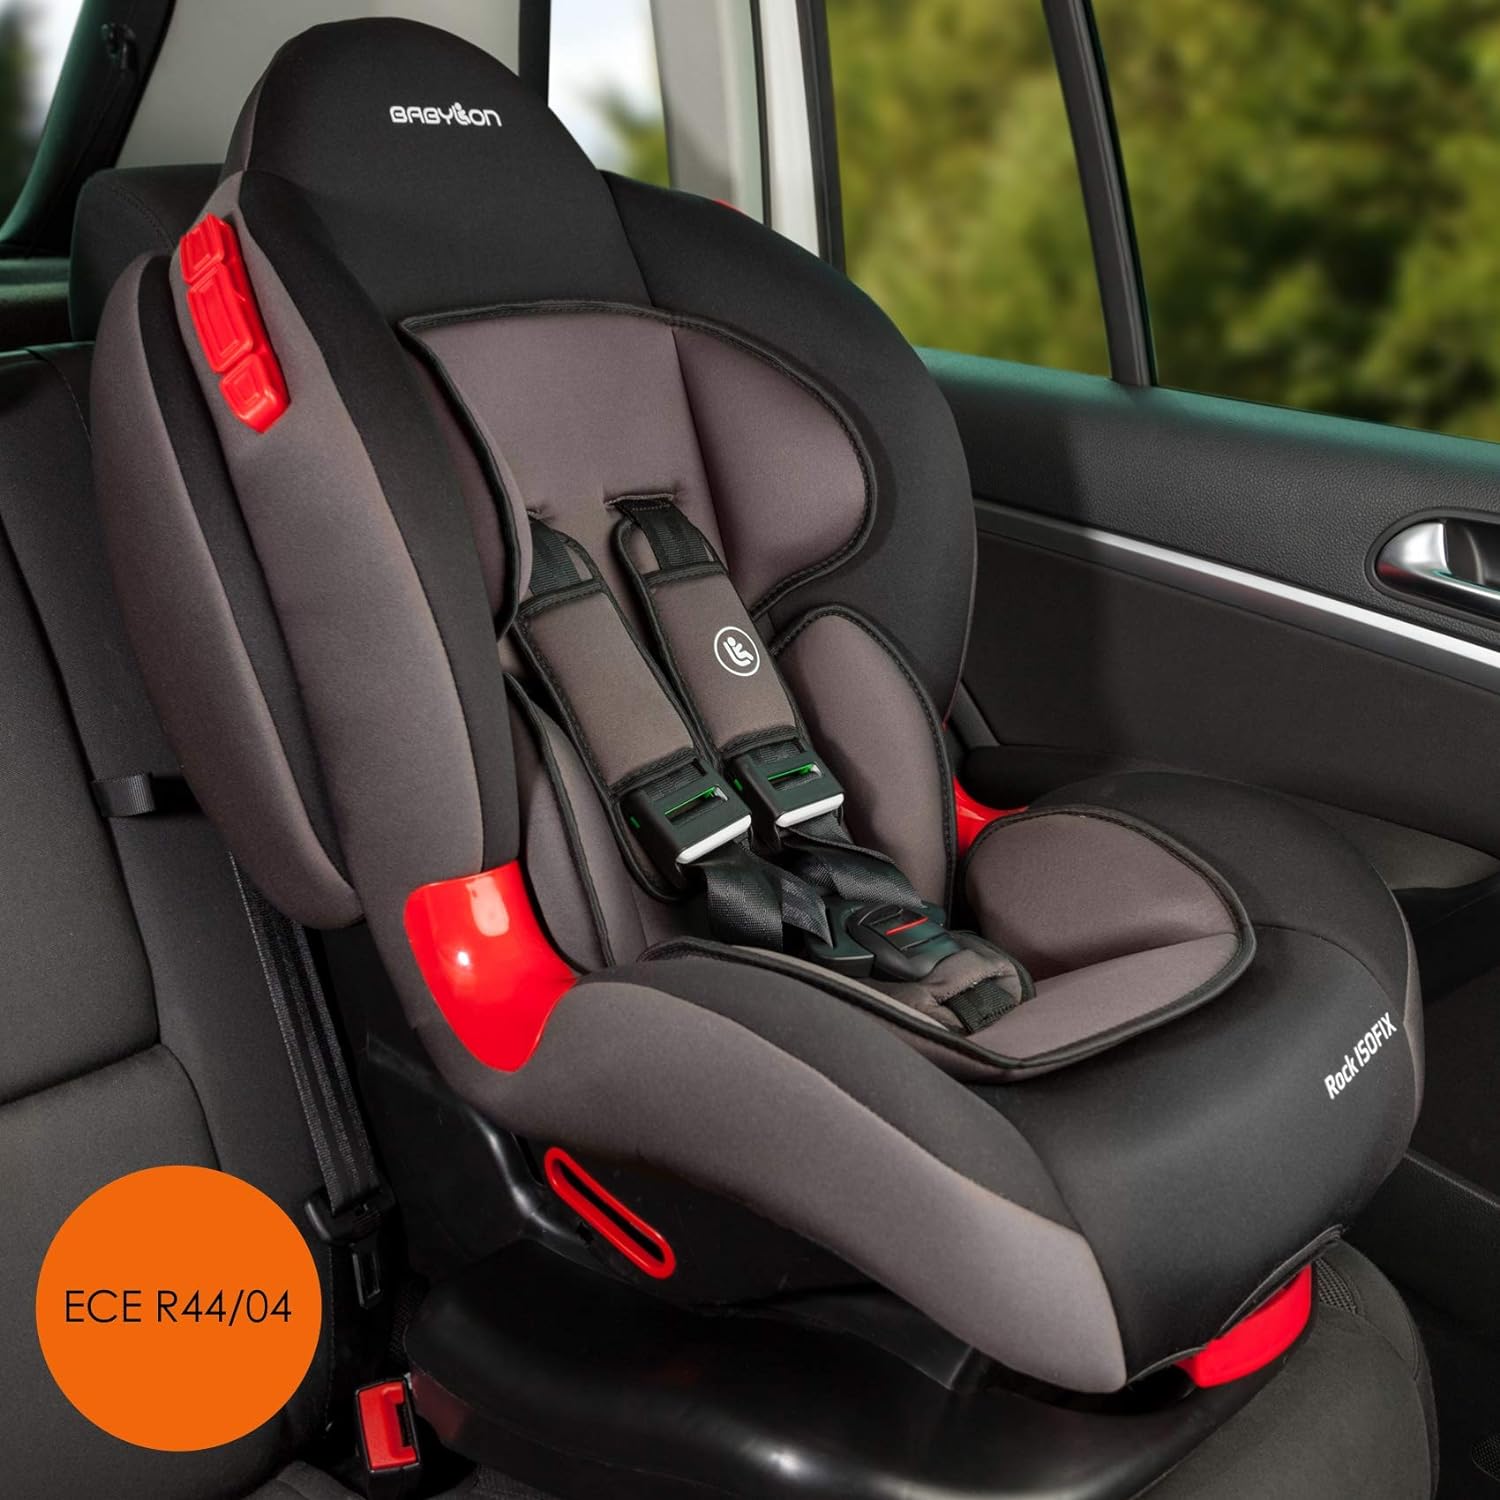 BABYLON Rock ISOFIX Baby Car Seat Group 1/2, Child Seat 9-25 kg (9 Months to 7 Years). Child Seat with Top Tether 5-Point Safety Belt. ECE R44/0 Black/Grey Smoky